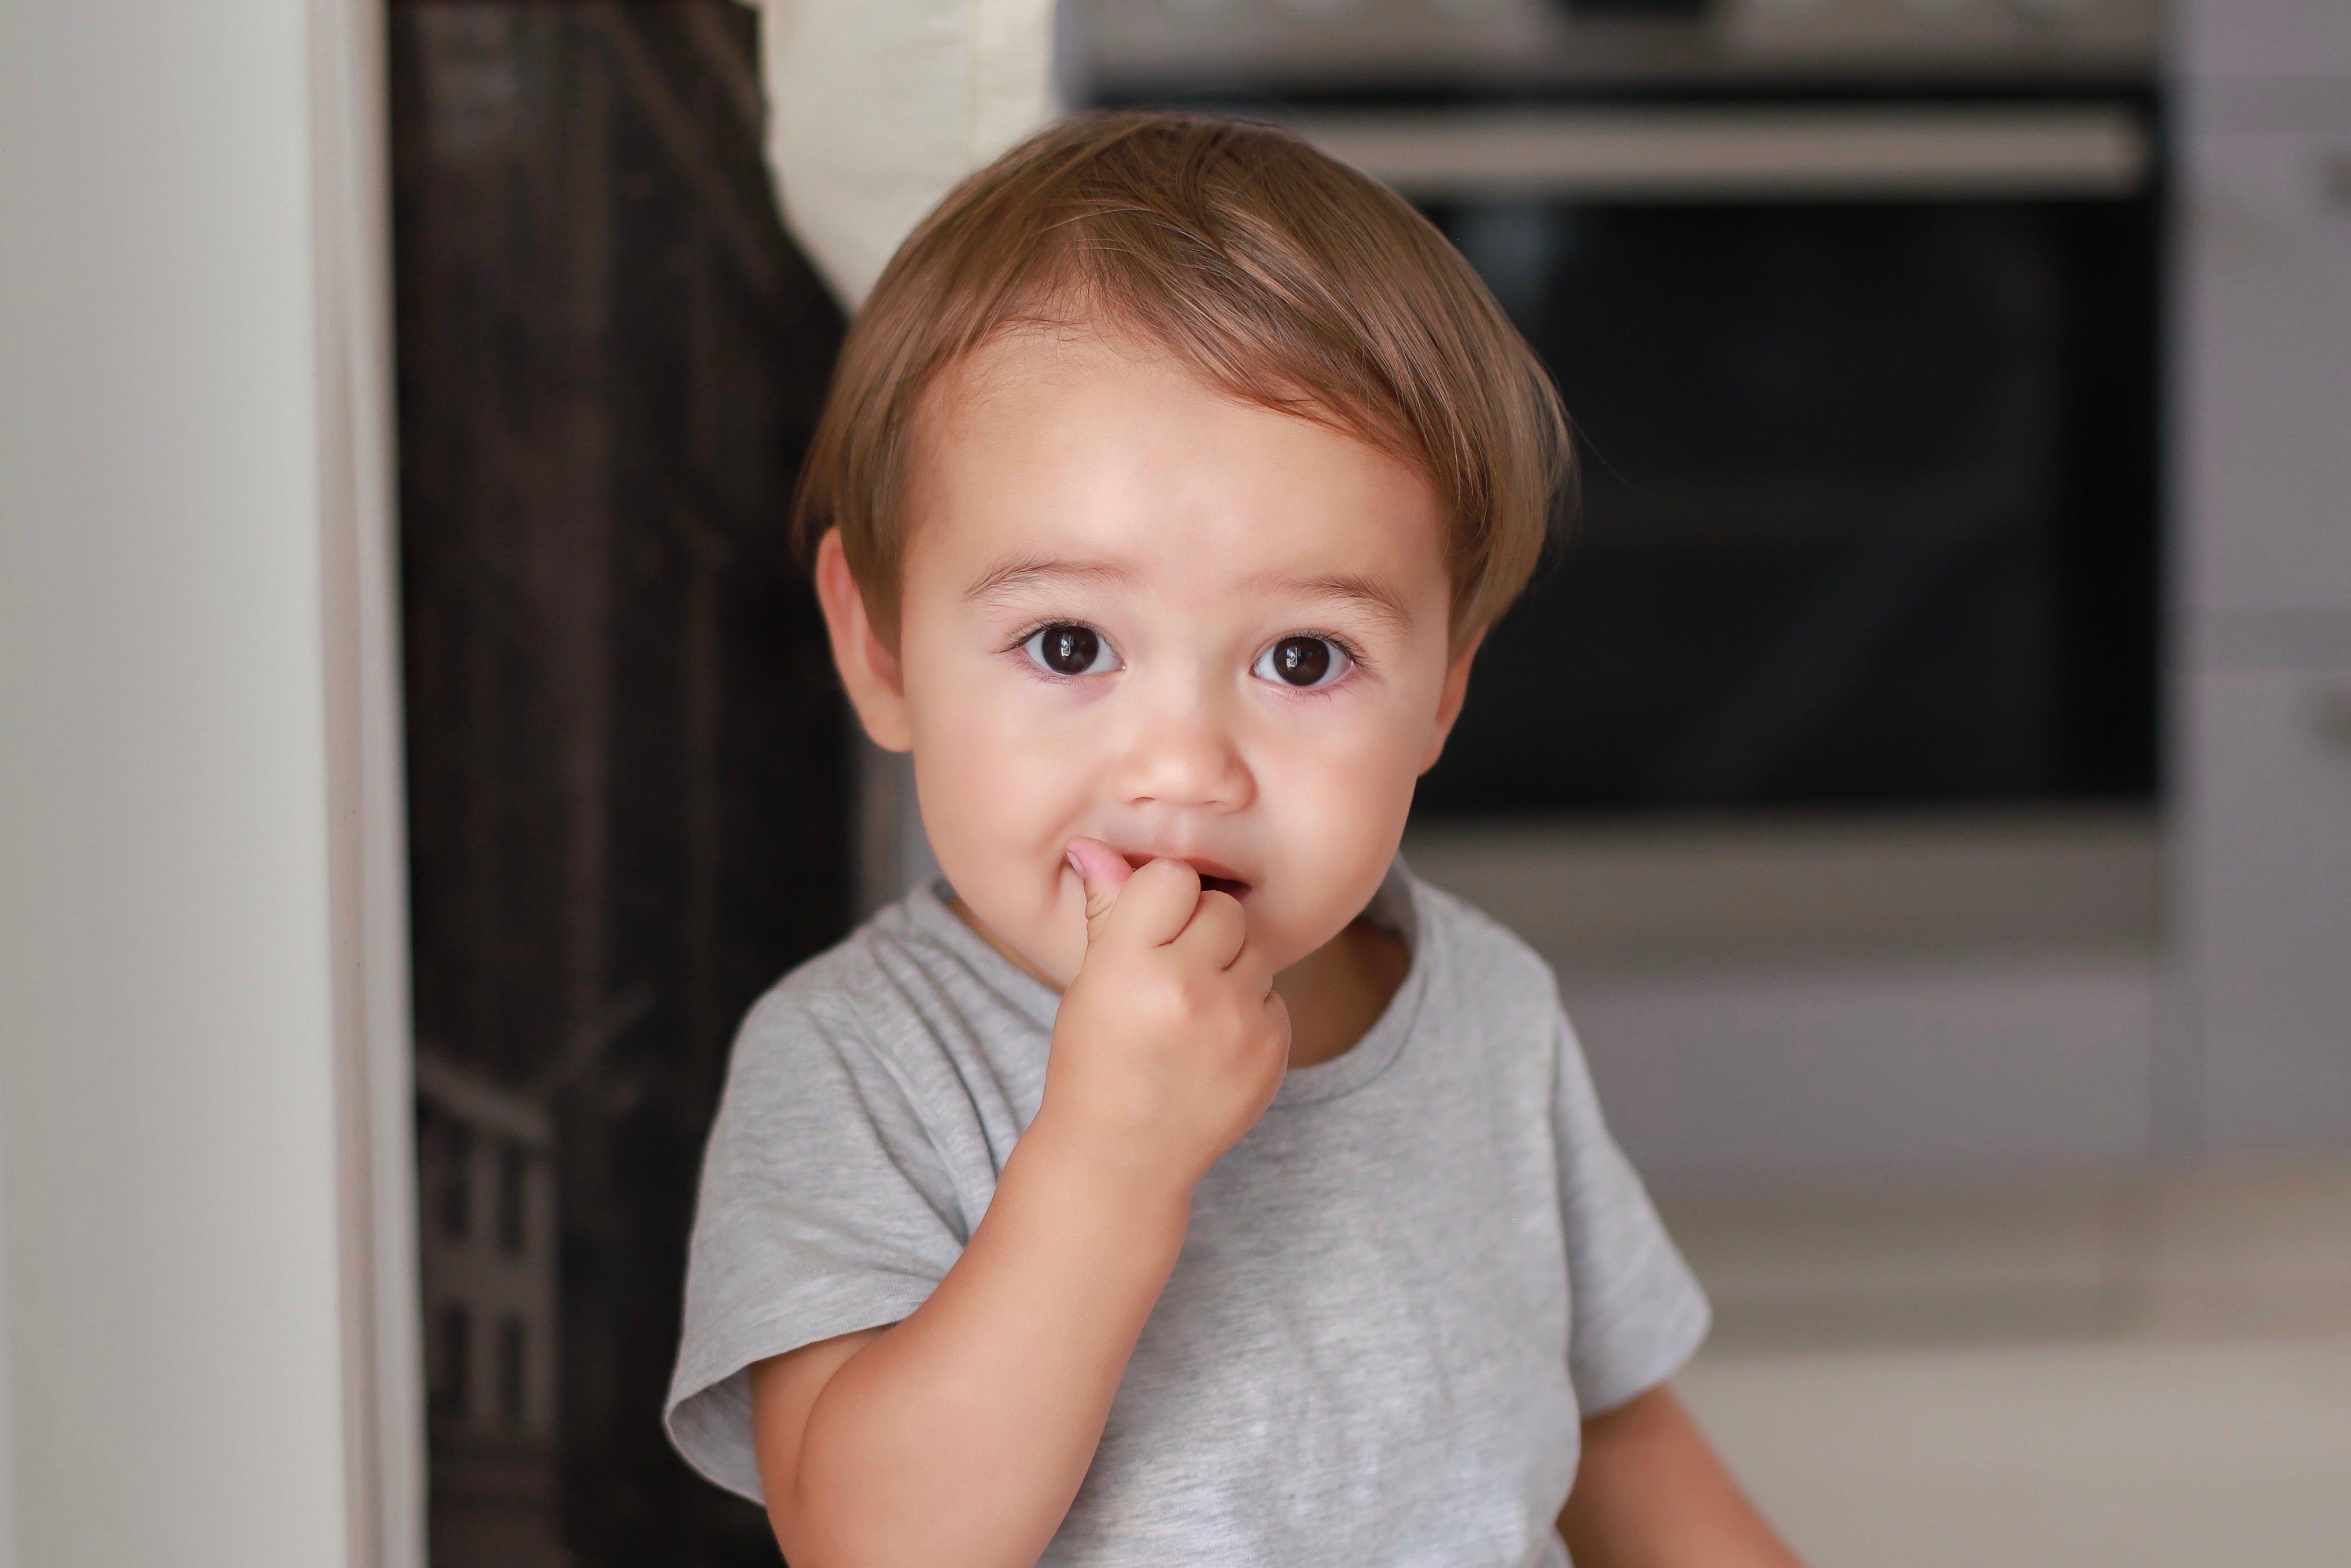 Headshot portrait of cute baby boy with finger inside his mouth eating snack at home. | Source: Shutterstock